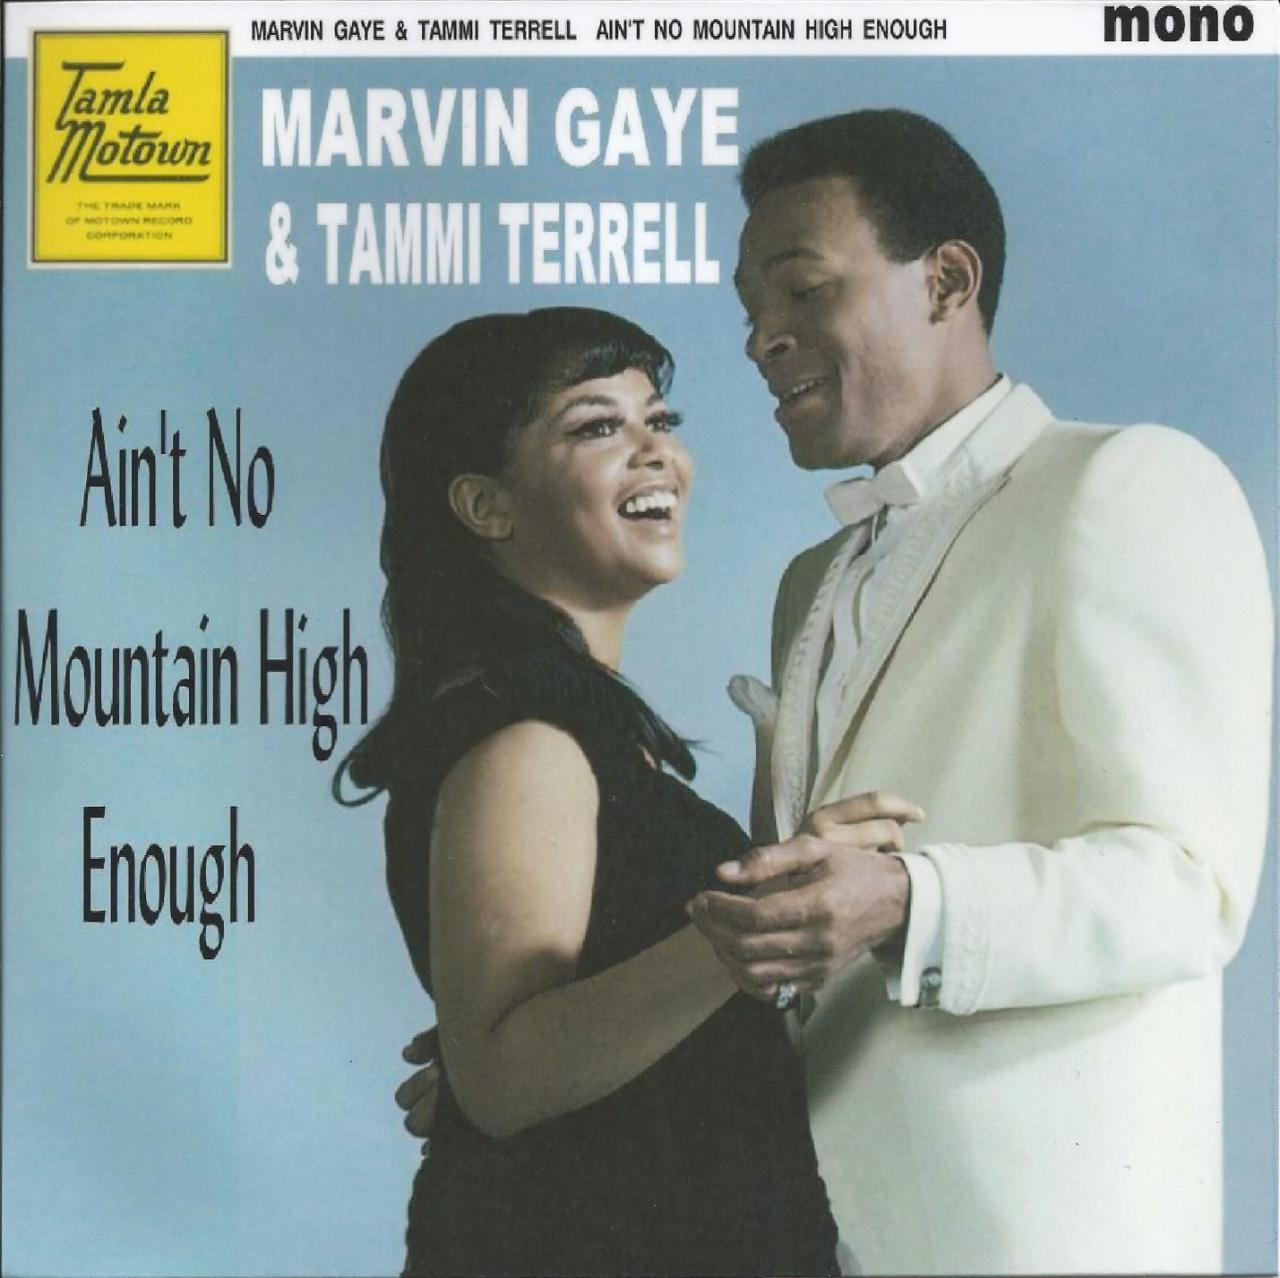 Marvin Gaye & Tammi Terrell - Ain't No Mountain High Enough mp3 download